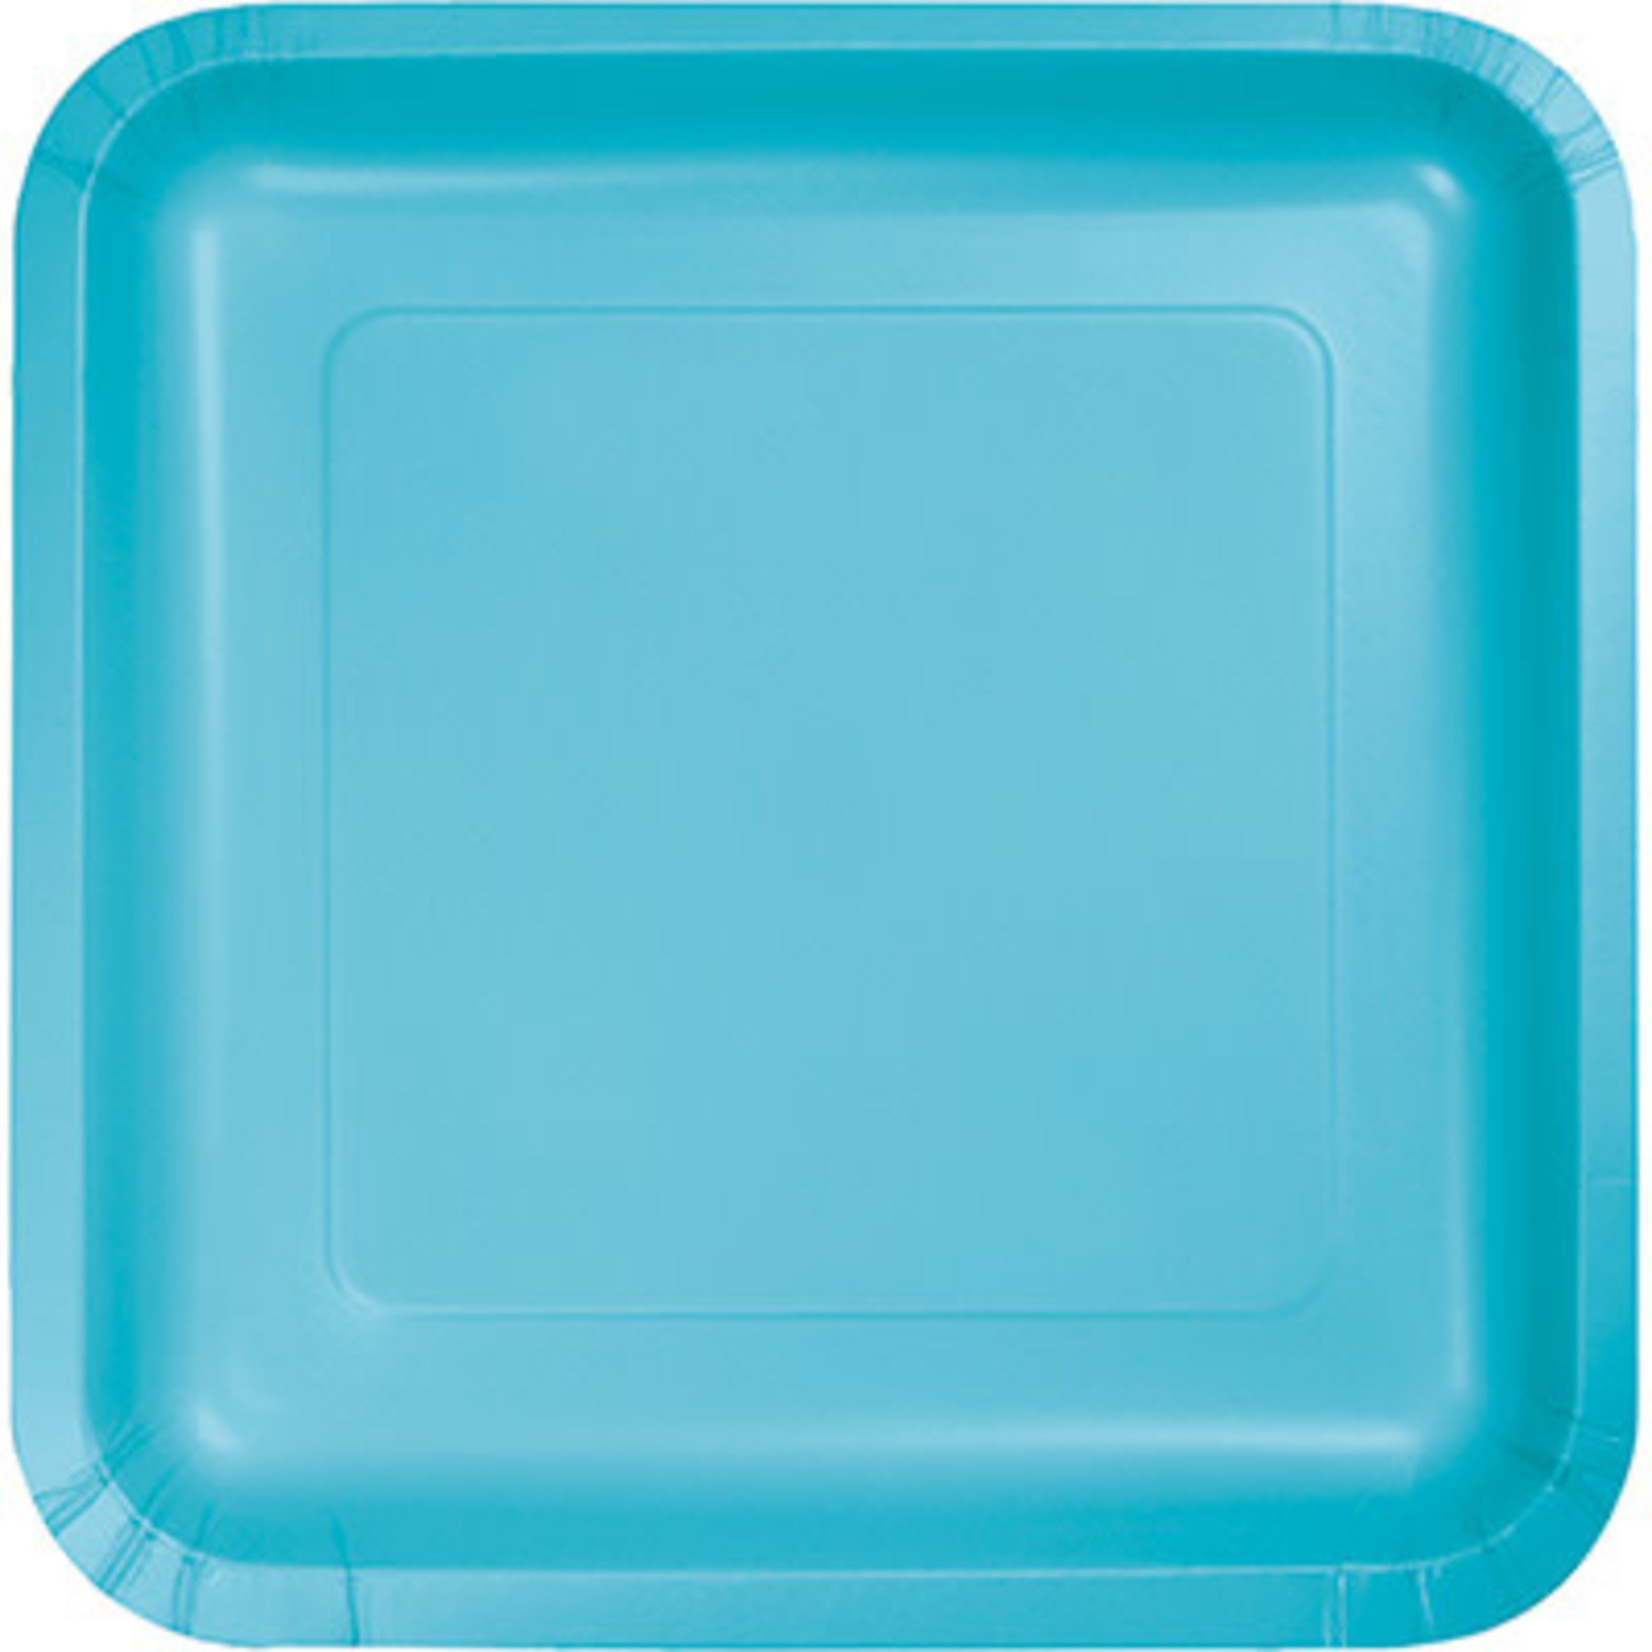 Touch of Color 9" Bermuda Blue Square Plates - 18ct.